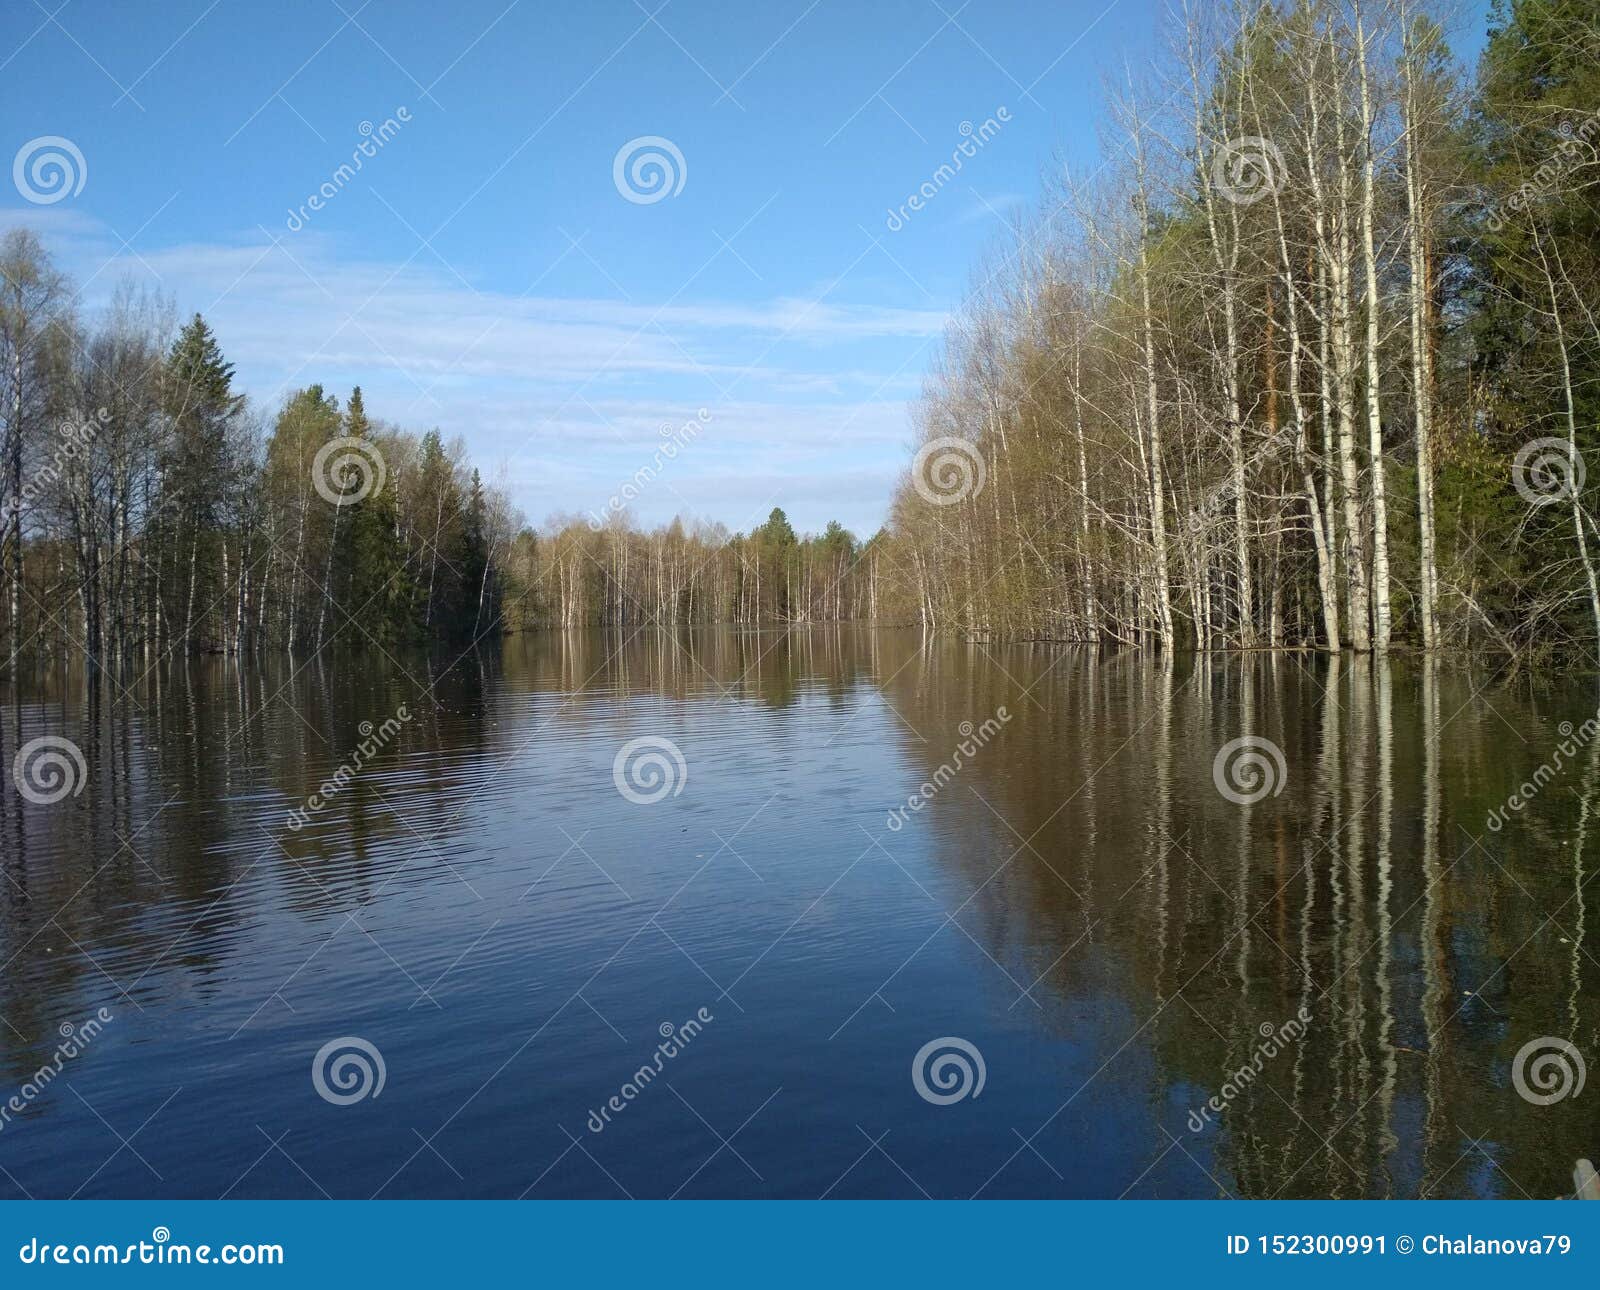 a spring freshet on a small forest river. location: komi republic russia